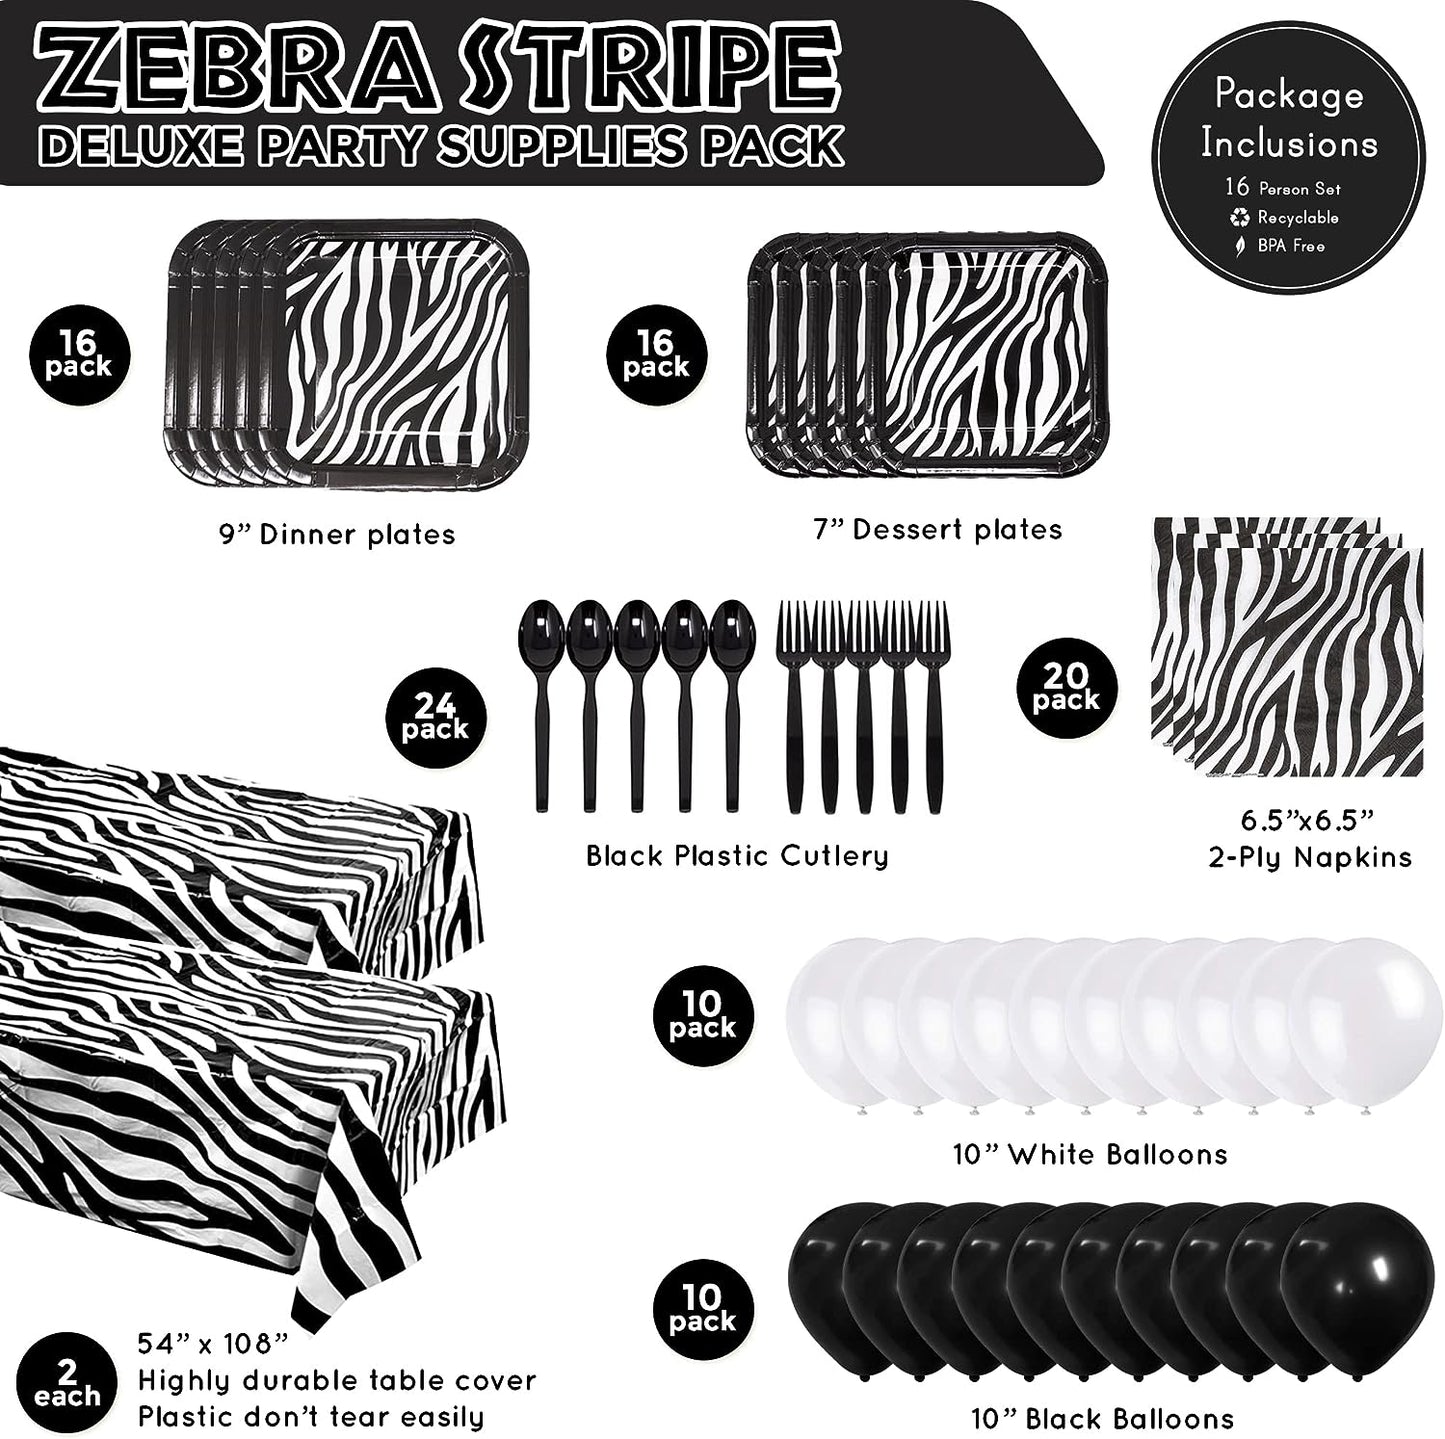 Zebra Stripe Deluxe Party Supplies Packs (Serves 16) includes 16 9-inch paper dinner plates, 16 7-inch paper dessert plates, 20 paper lunch napkins, 2 plastic table covers, 24 black plastic forks, 24 black plastic spoons, 10 black balloons, and 10 white balloons.